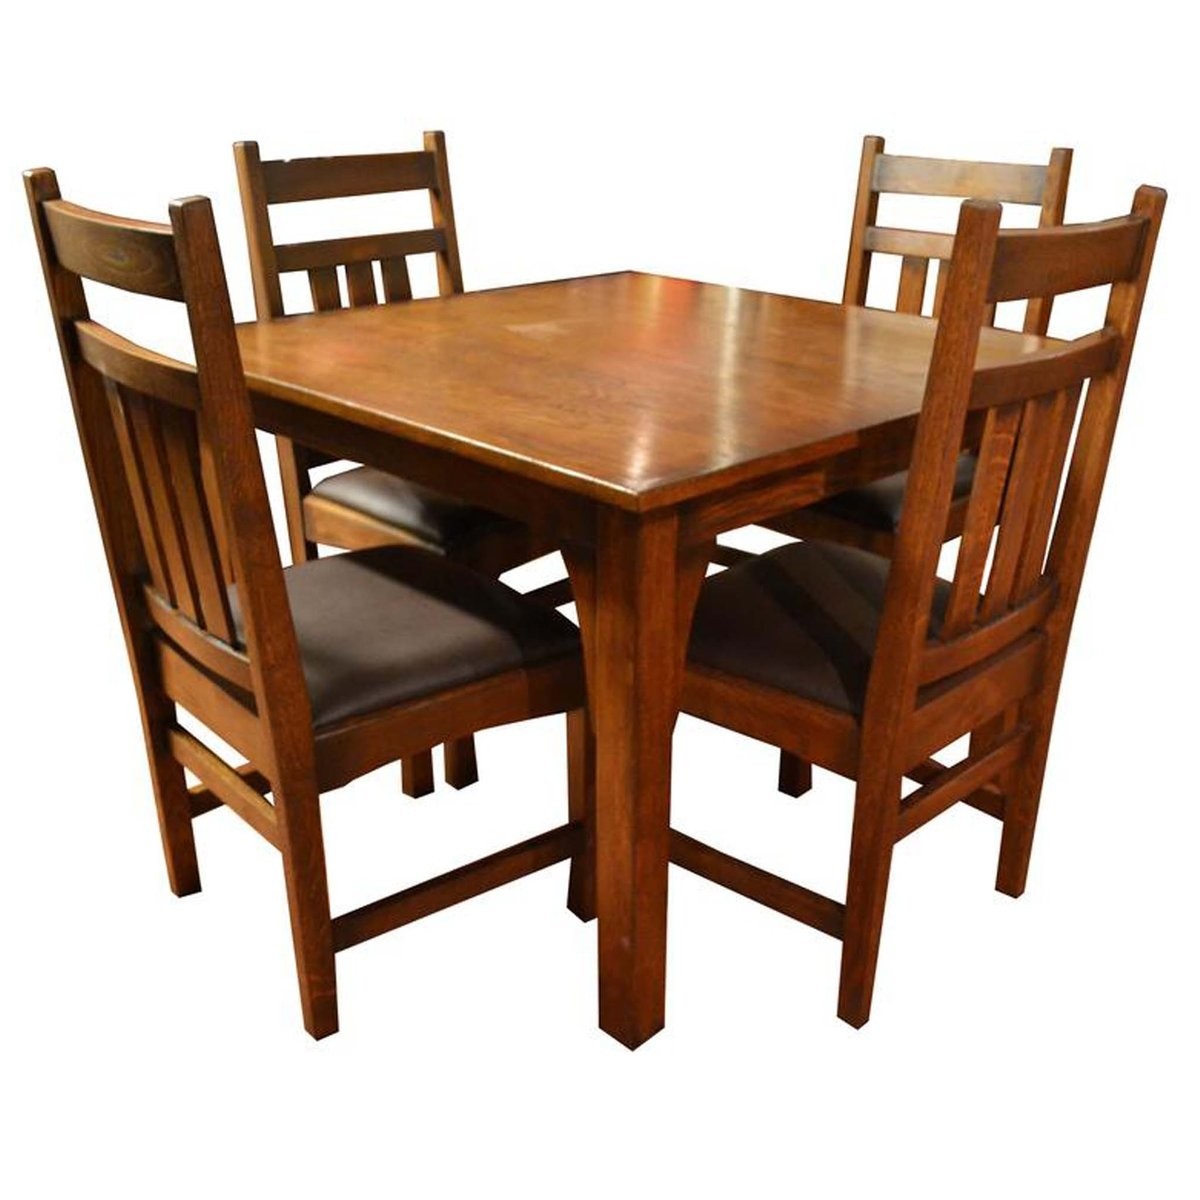 Mission solid oak 42 square table dining set w 4